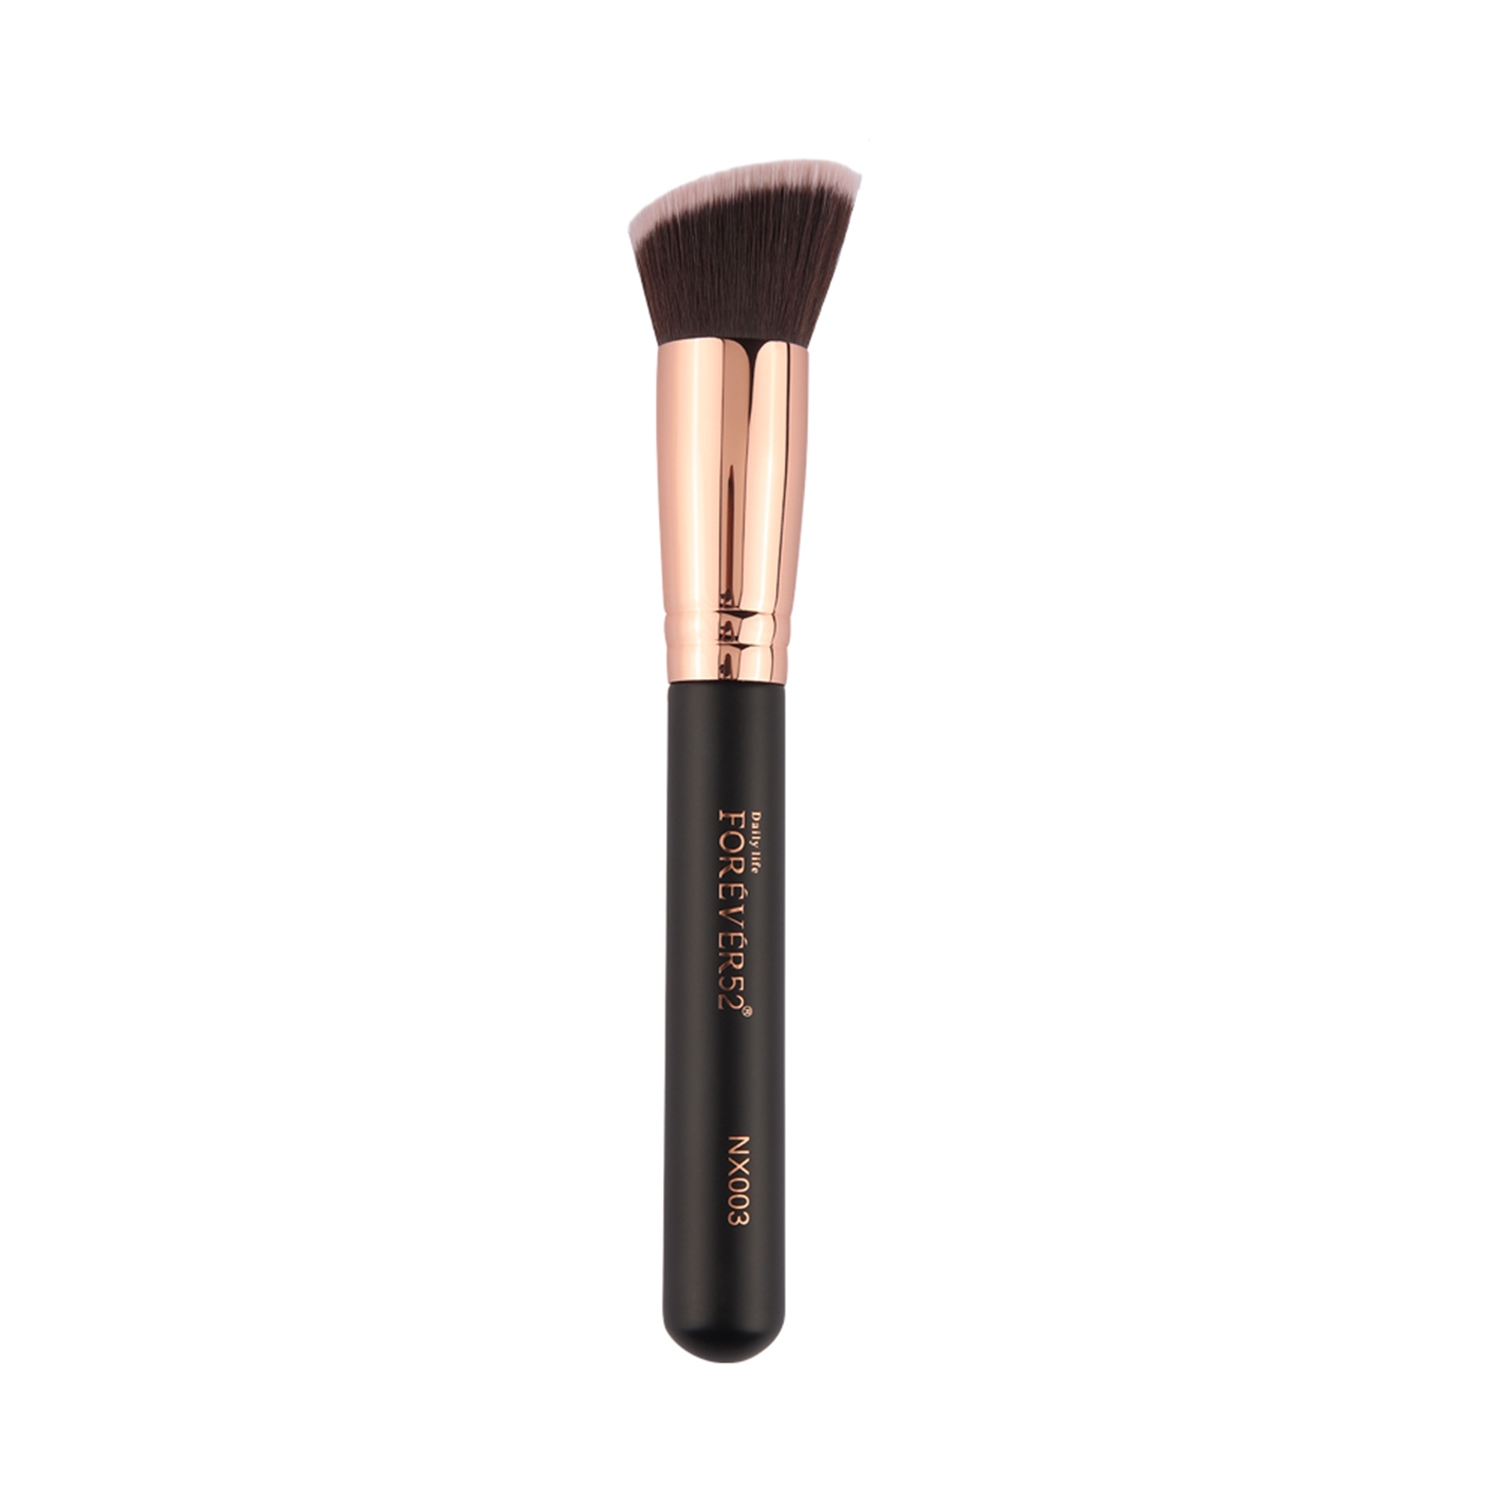 Daily Life Forever52 | Daily Life Forever52 Contour Brush - NX003 (1Pc)